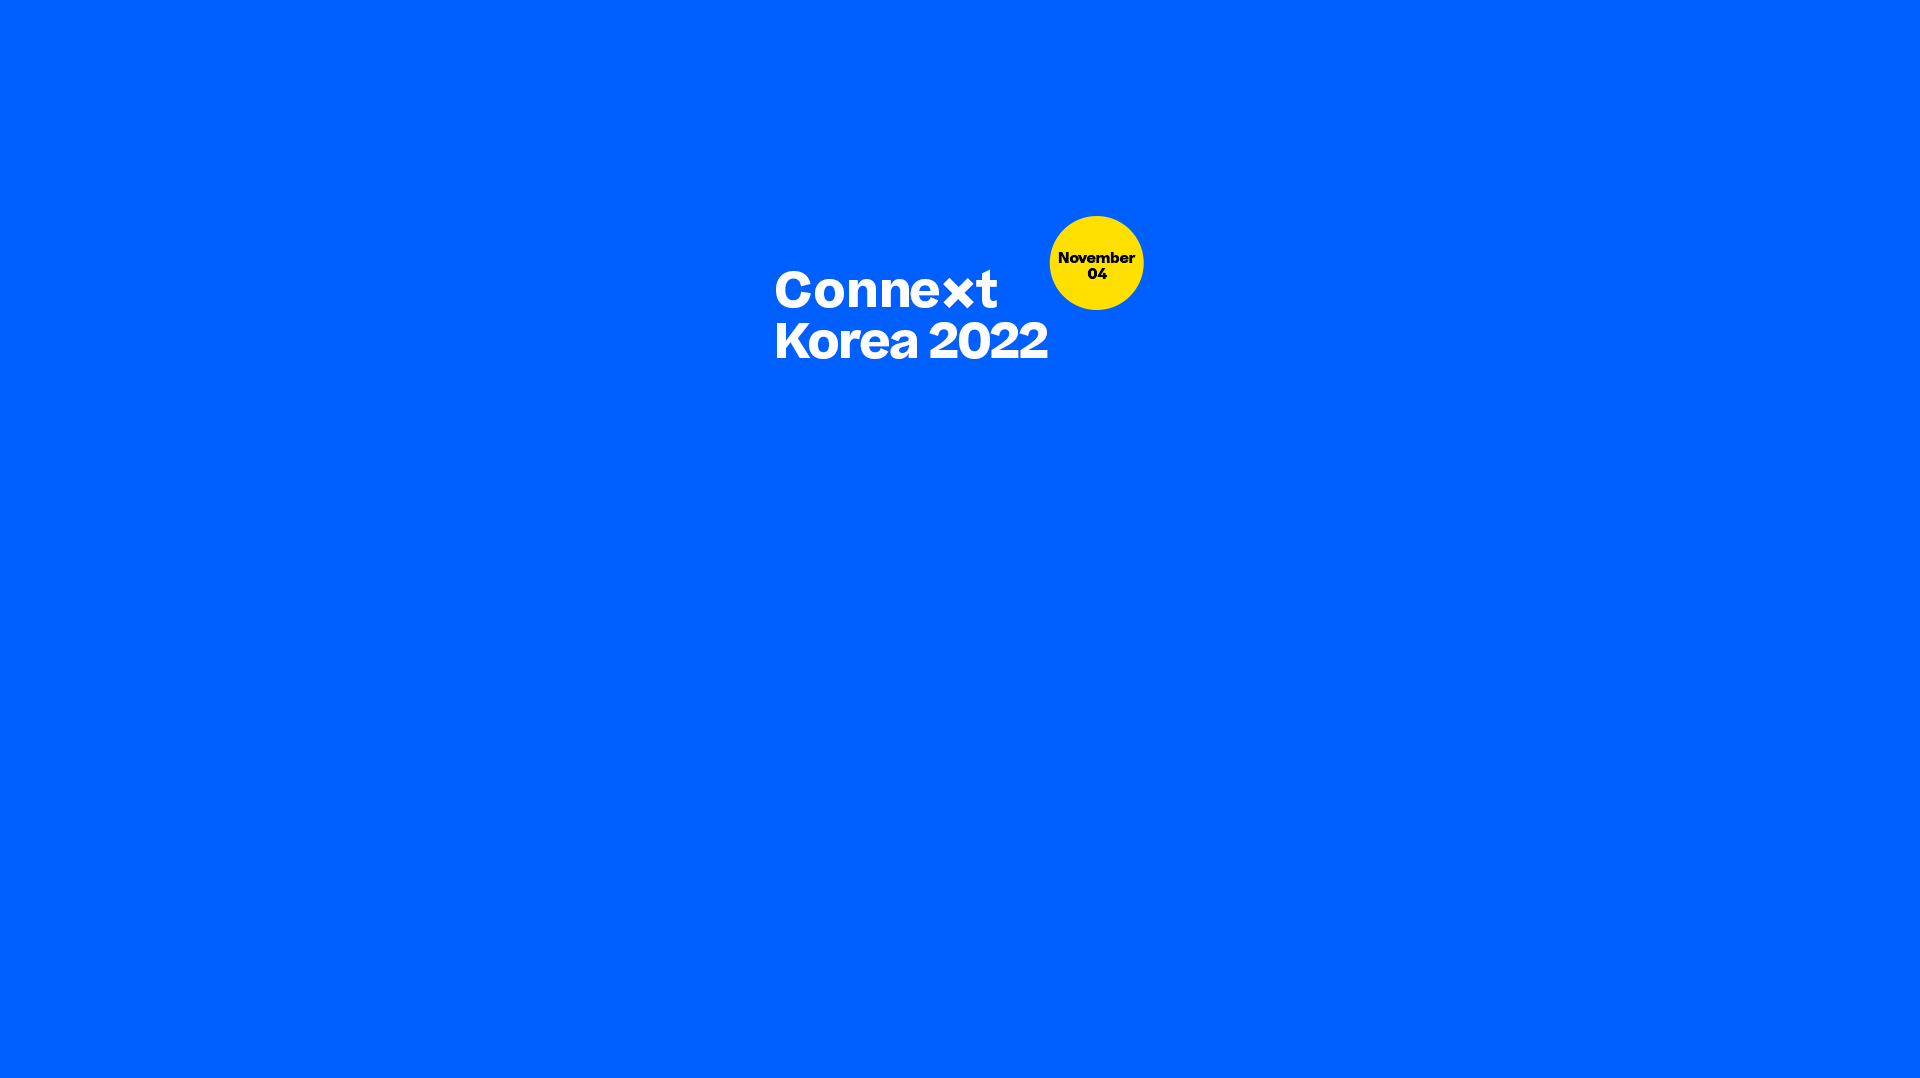 Welcome to Connext Korea 2022 - the Pharma Software Summit